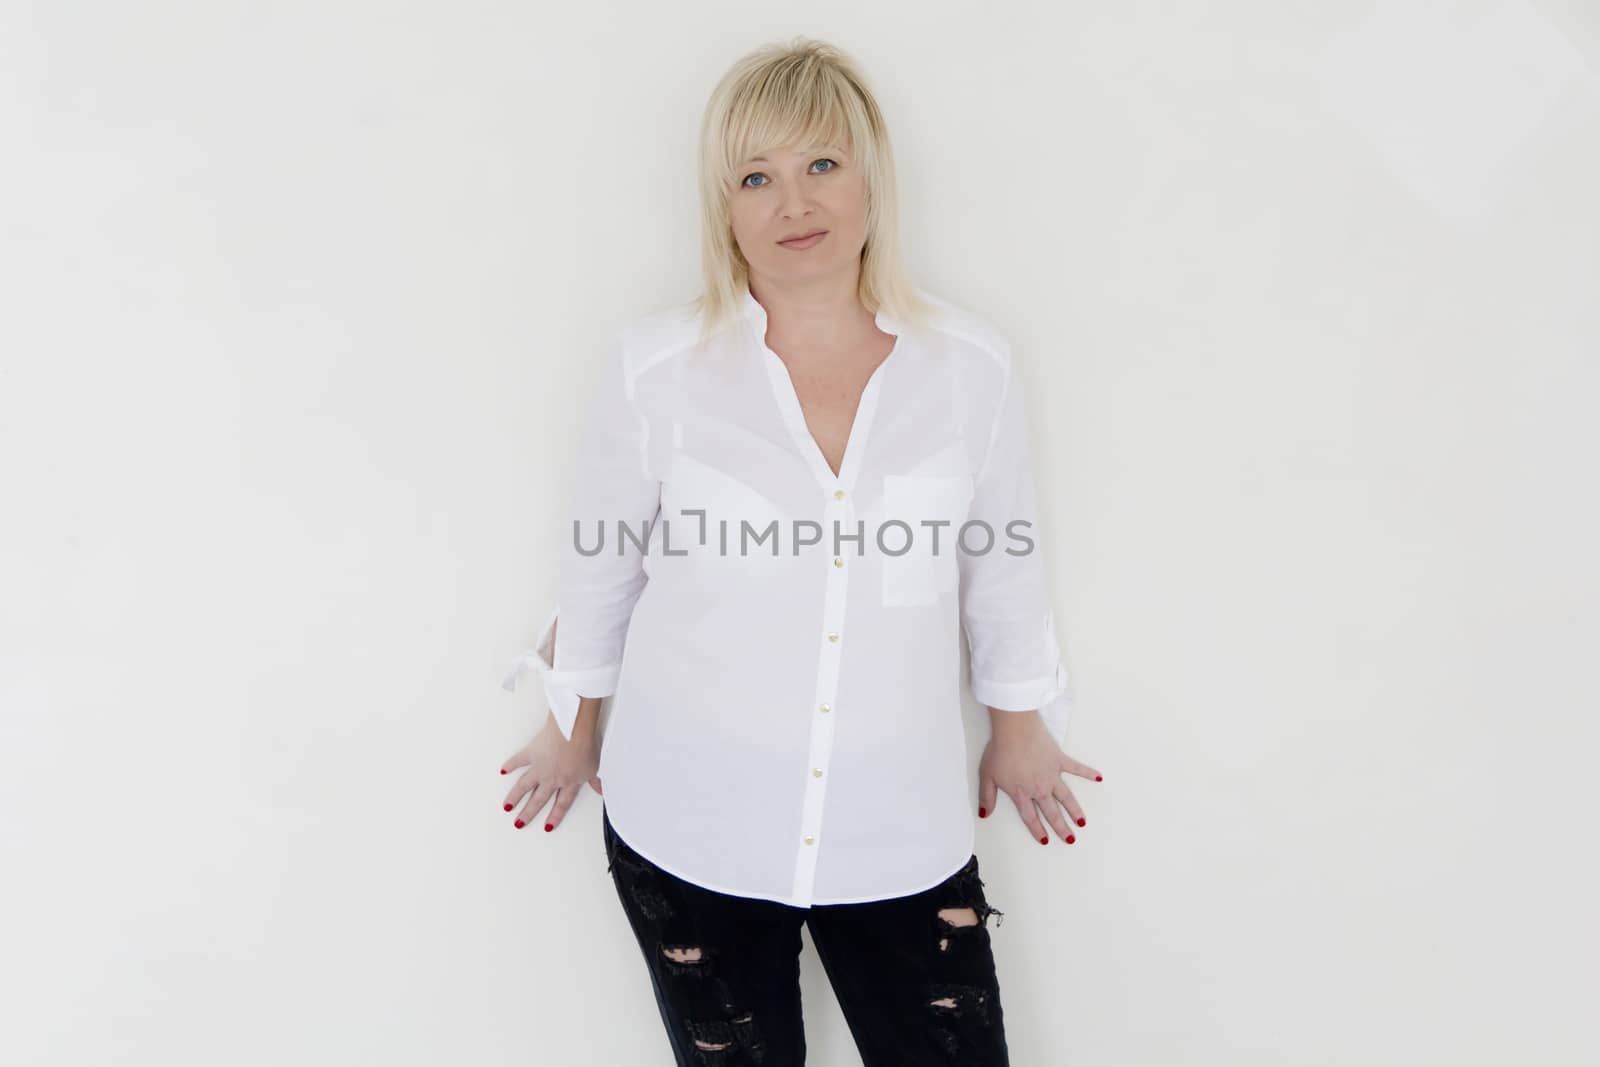 Woman in white stand inside empty room by Julialine